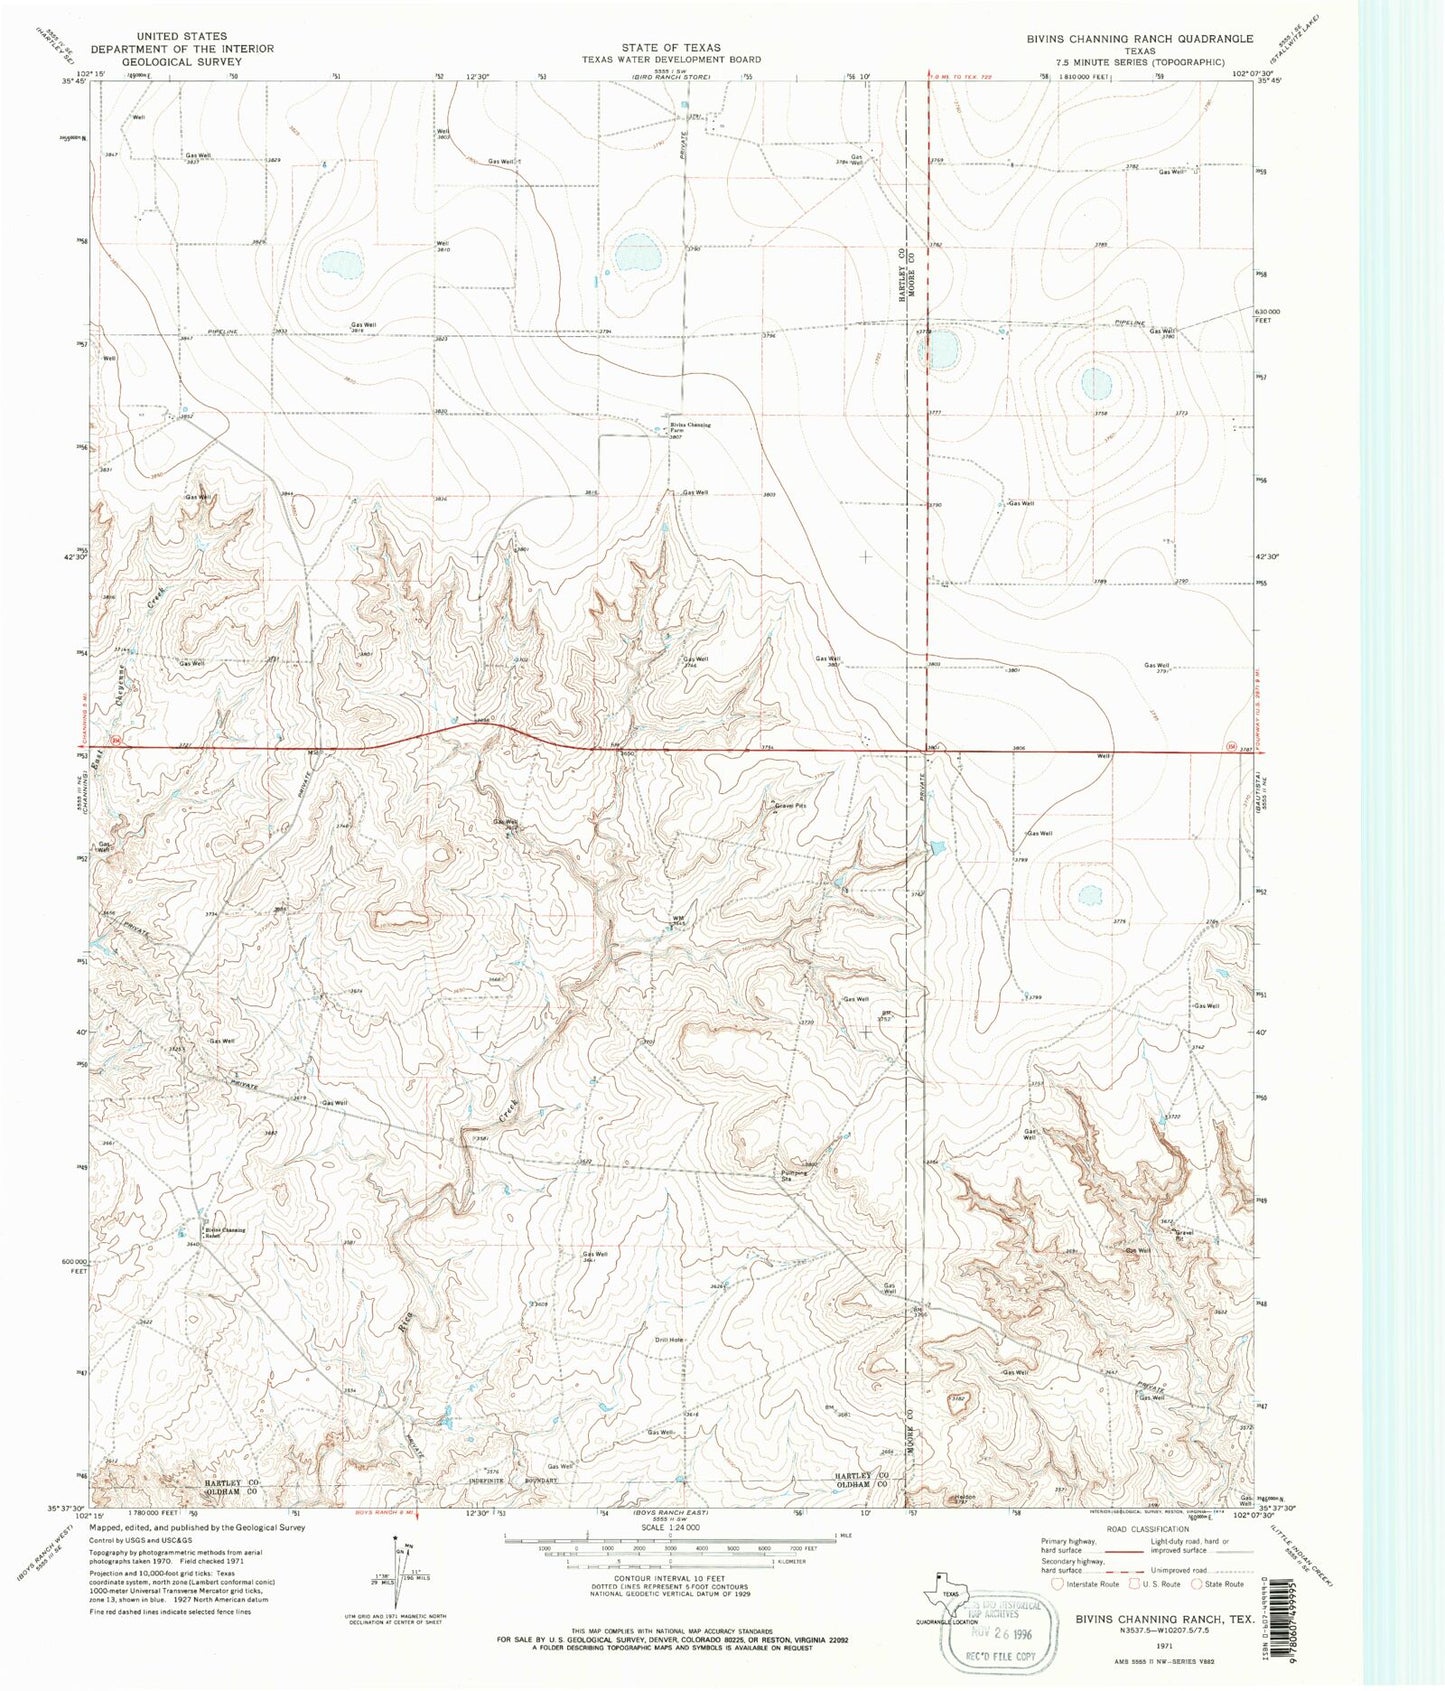 Classic USGS Bivins Channing Ranch Texas 7.5'x7.5' Topo Map Image